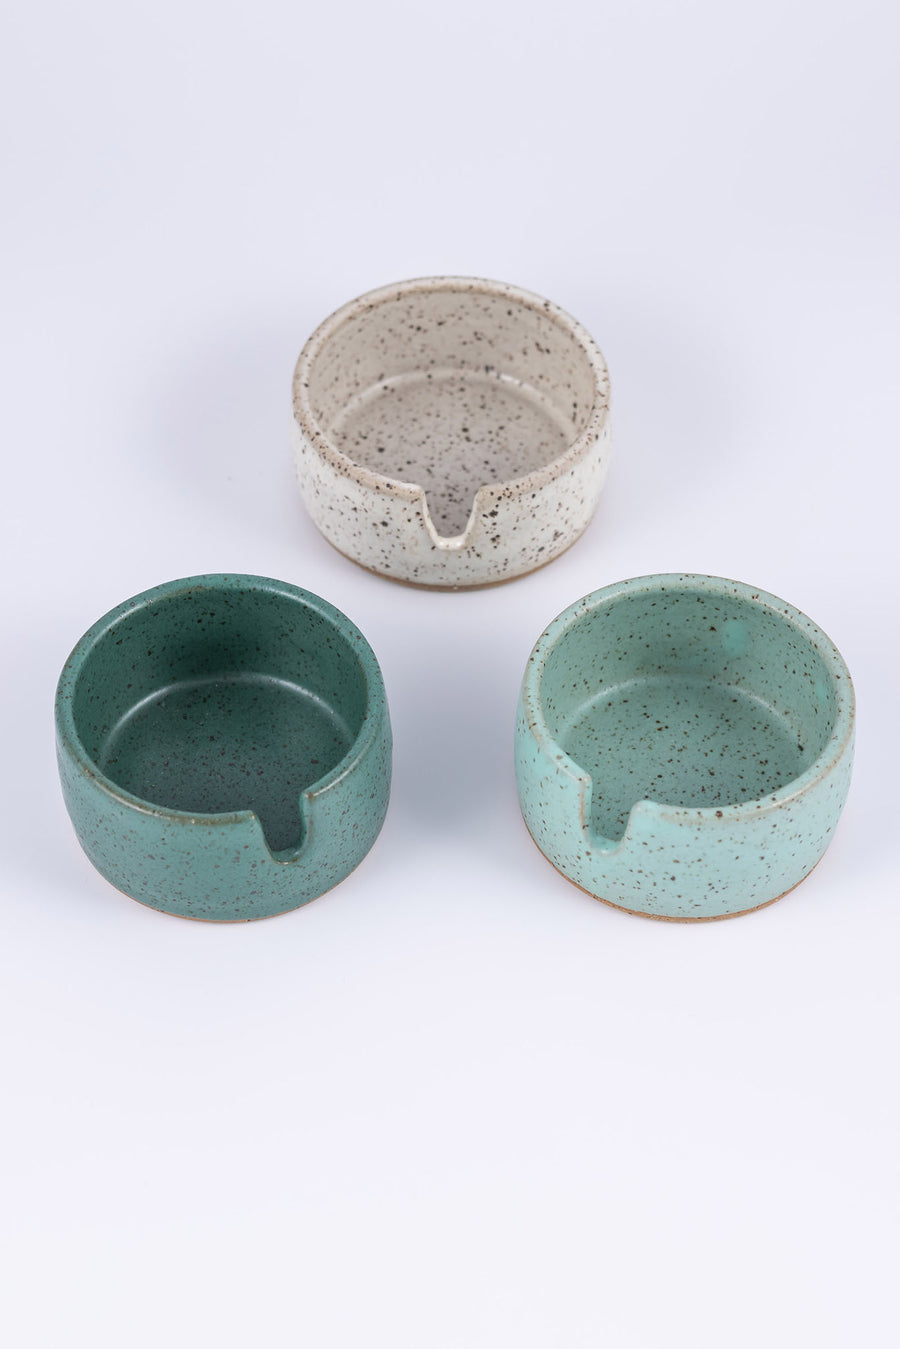 Three stoneware ashtrays each a different color of speckled clay- white, light blue, and darker greenish blue